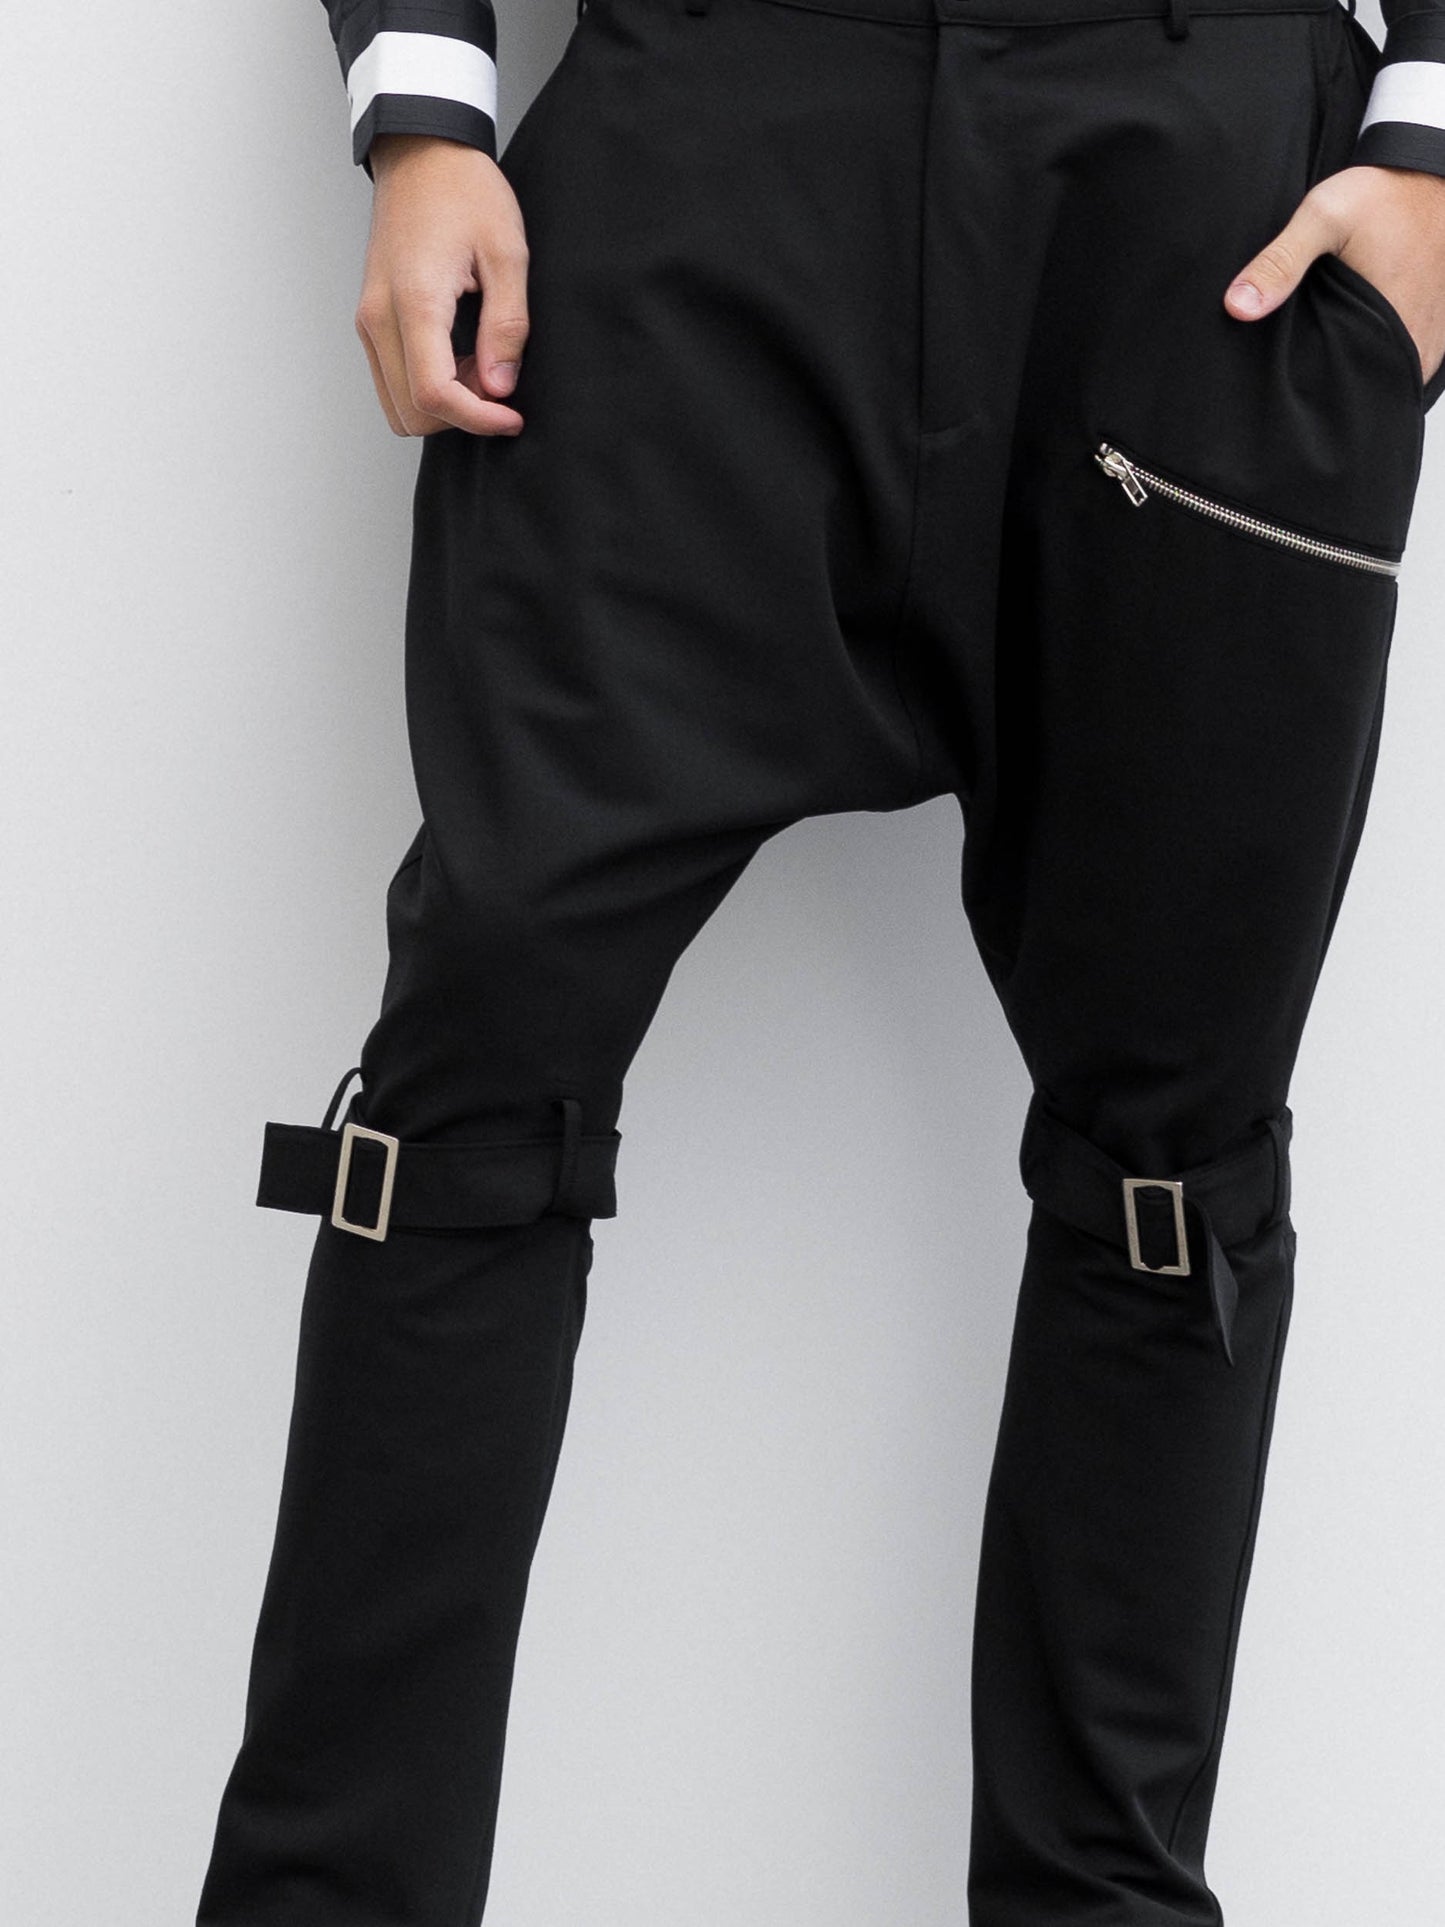 Black Pants With Buckles